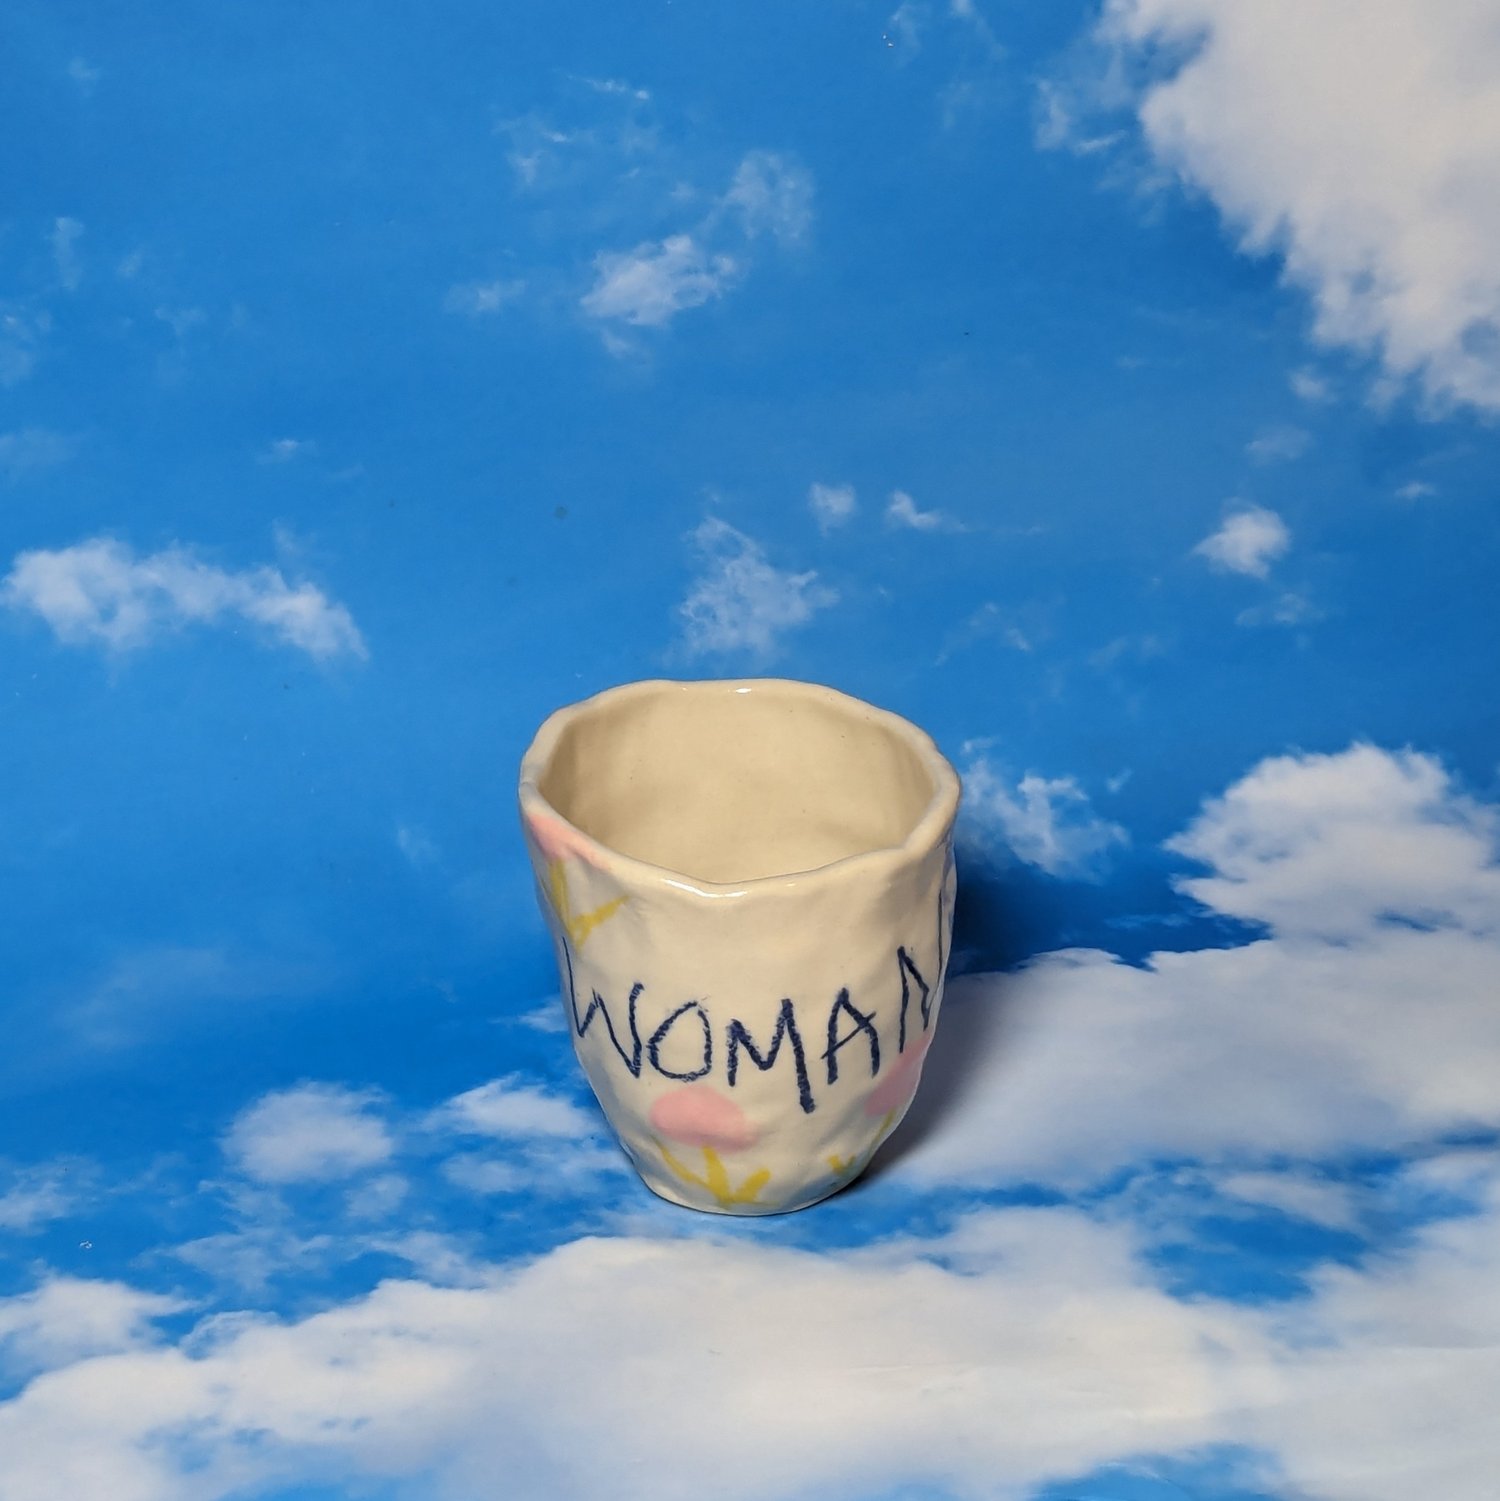 Image of woman latte cup